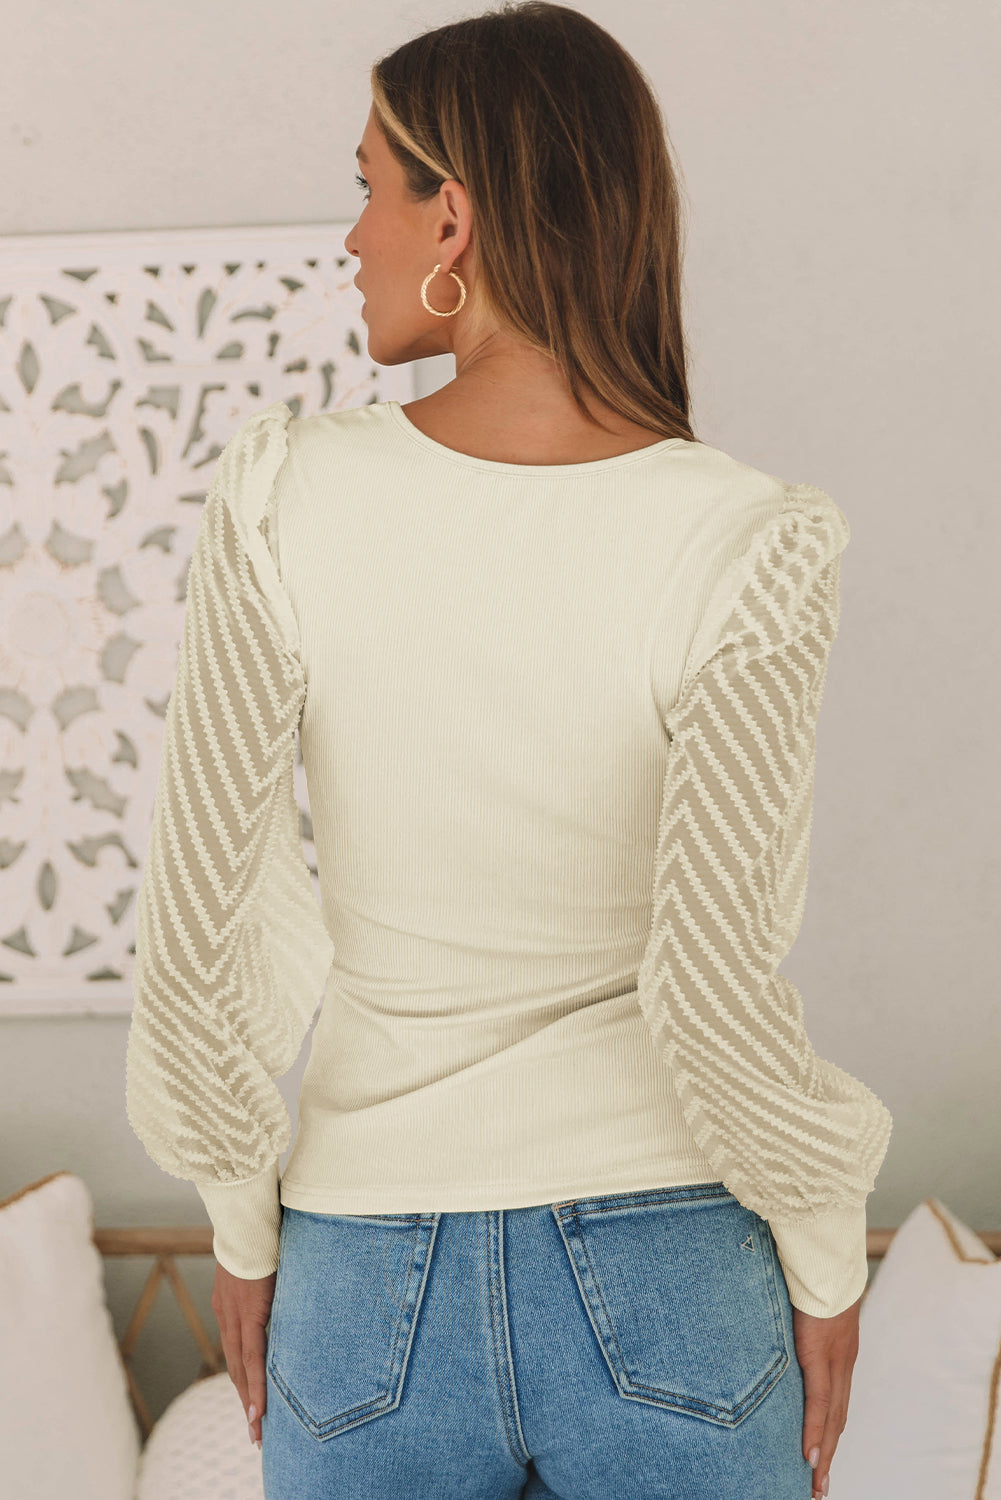 Textured Mesh Sleeve Ribbed Blouse - Women’s Clothing & Accessories - Shirts & Tops - 2 - 2024